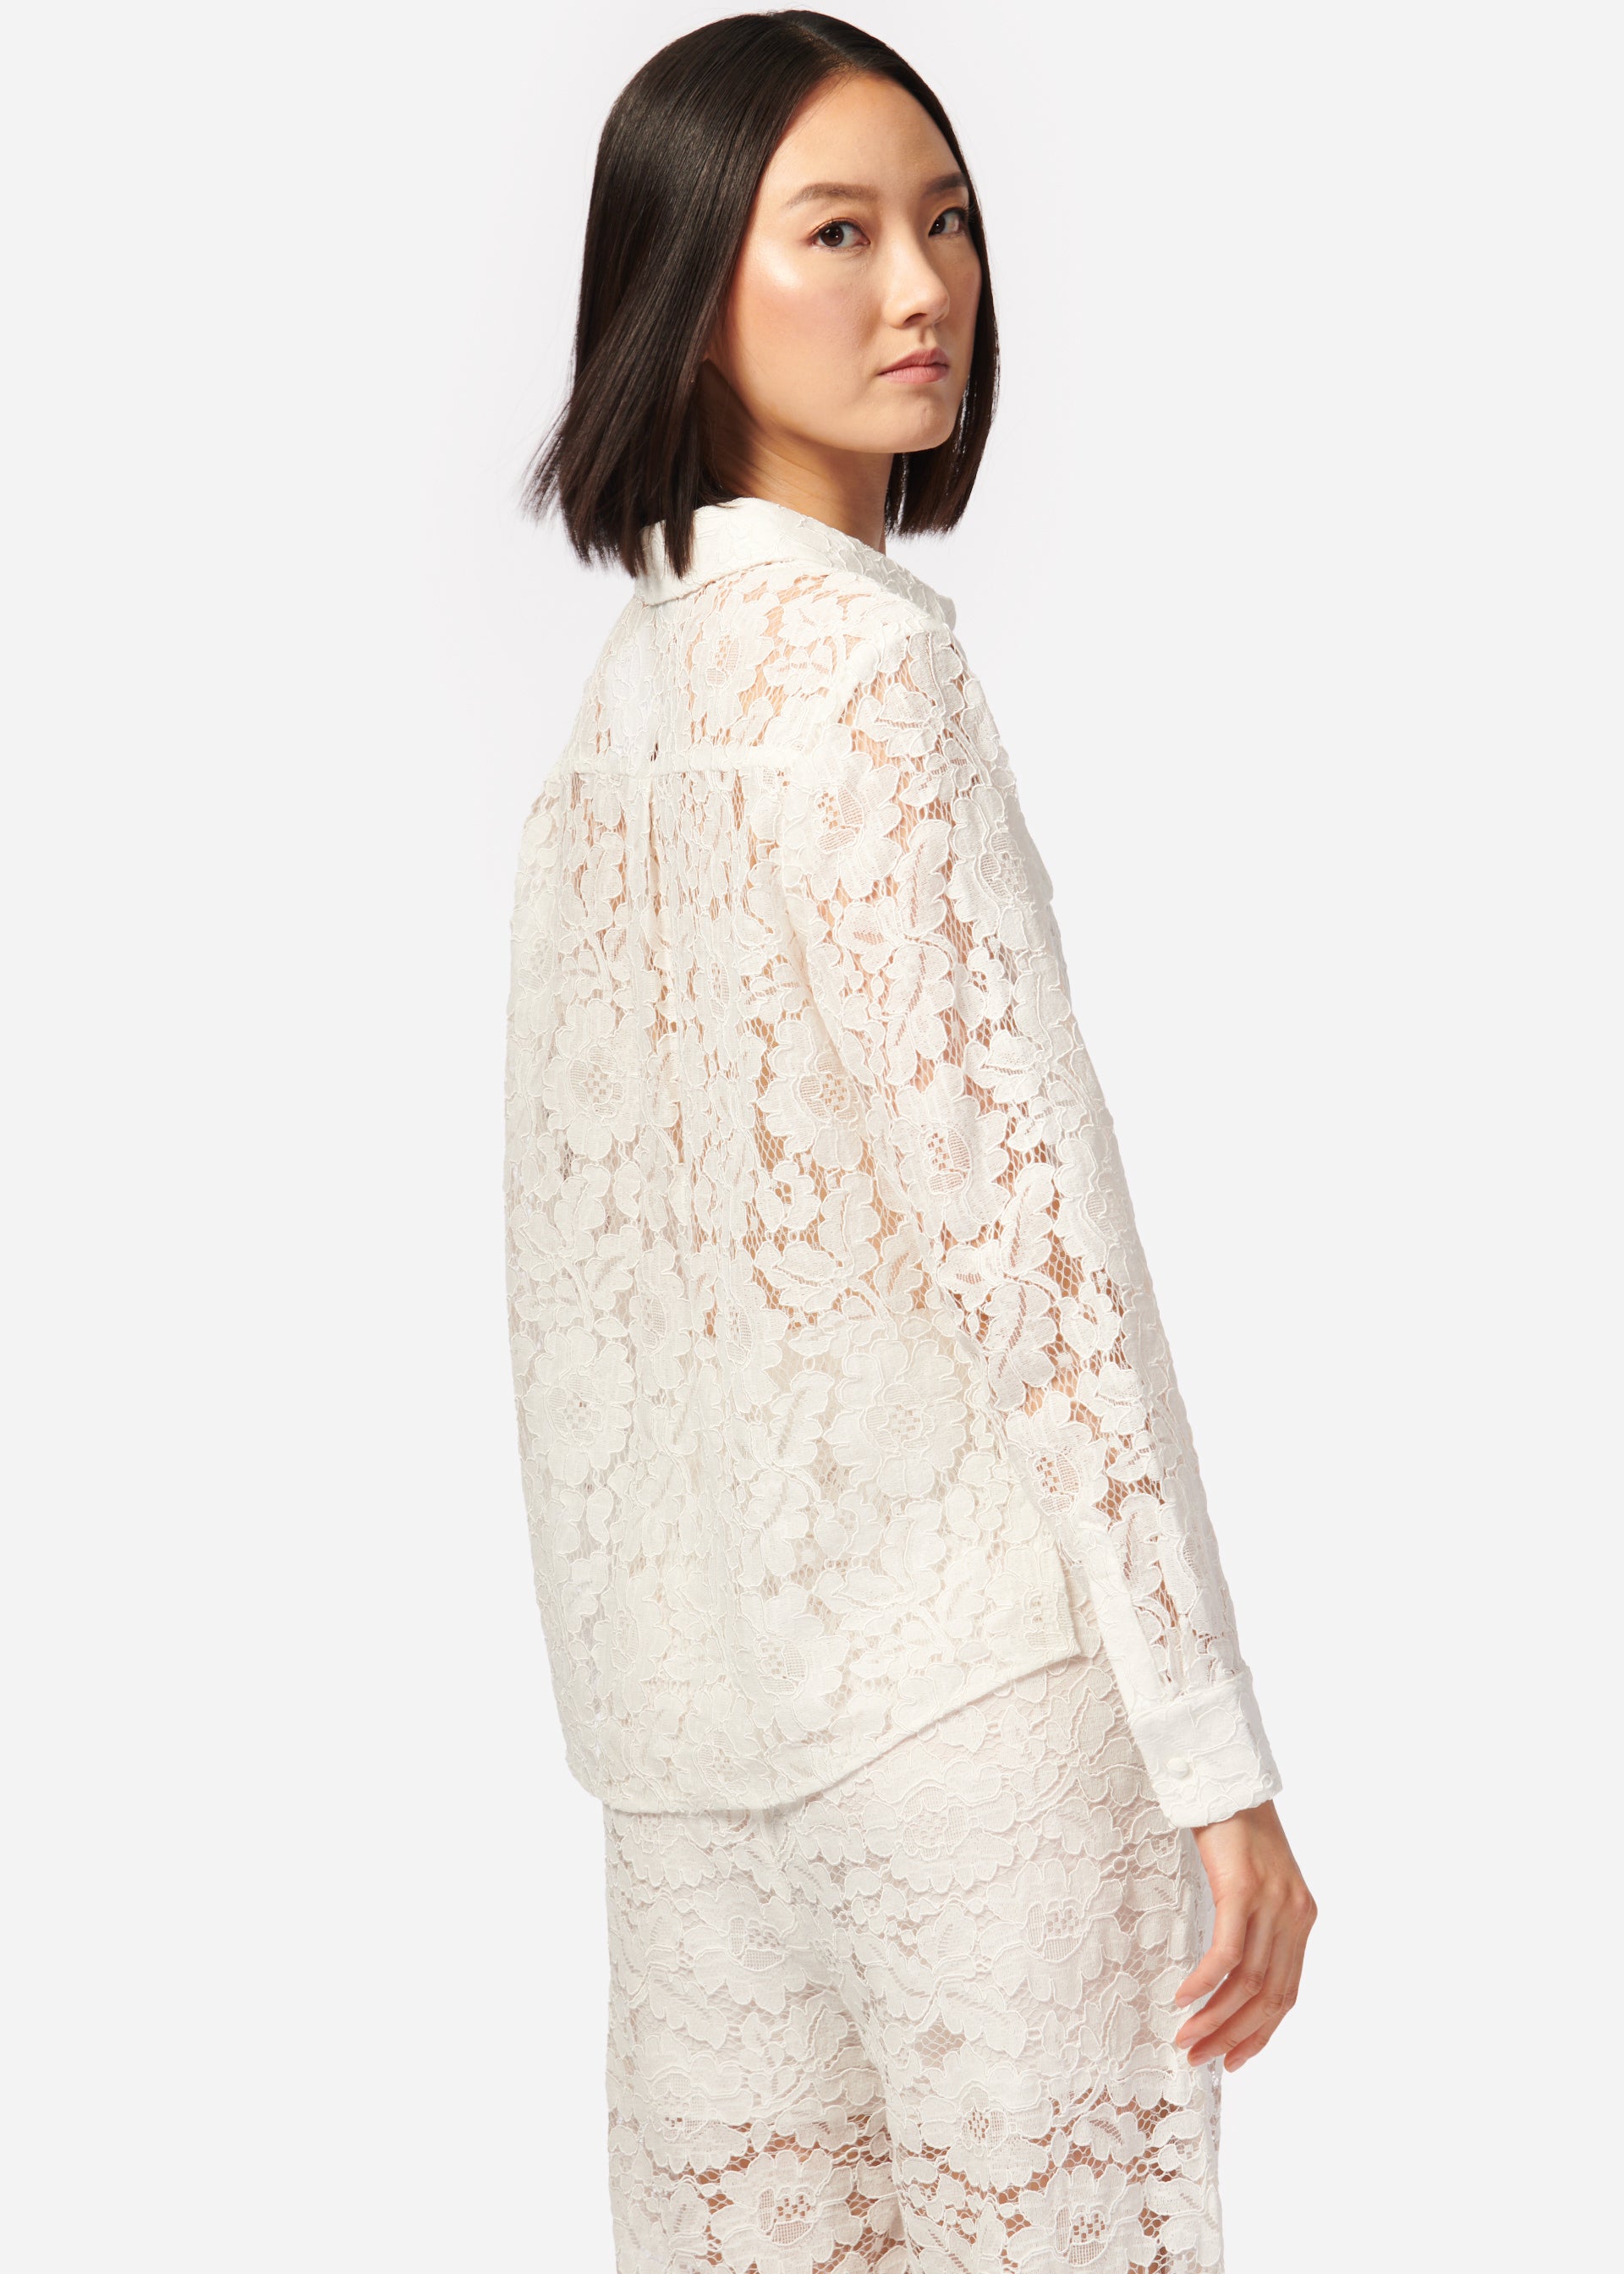 Rosalind Lace Top White